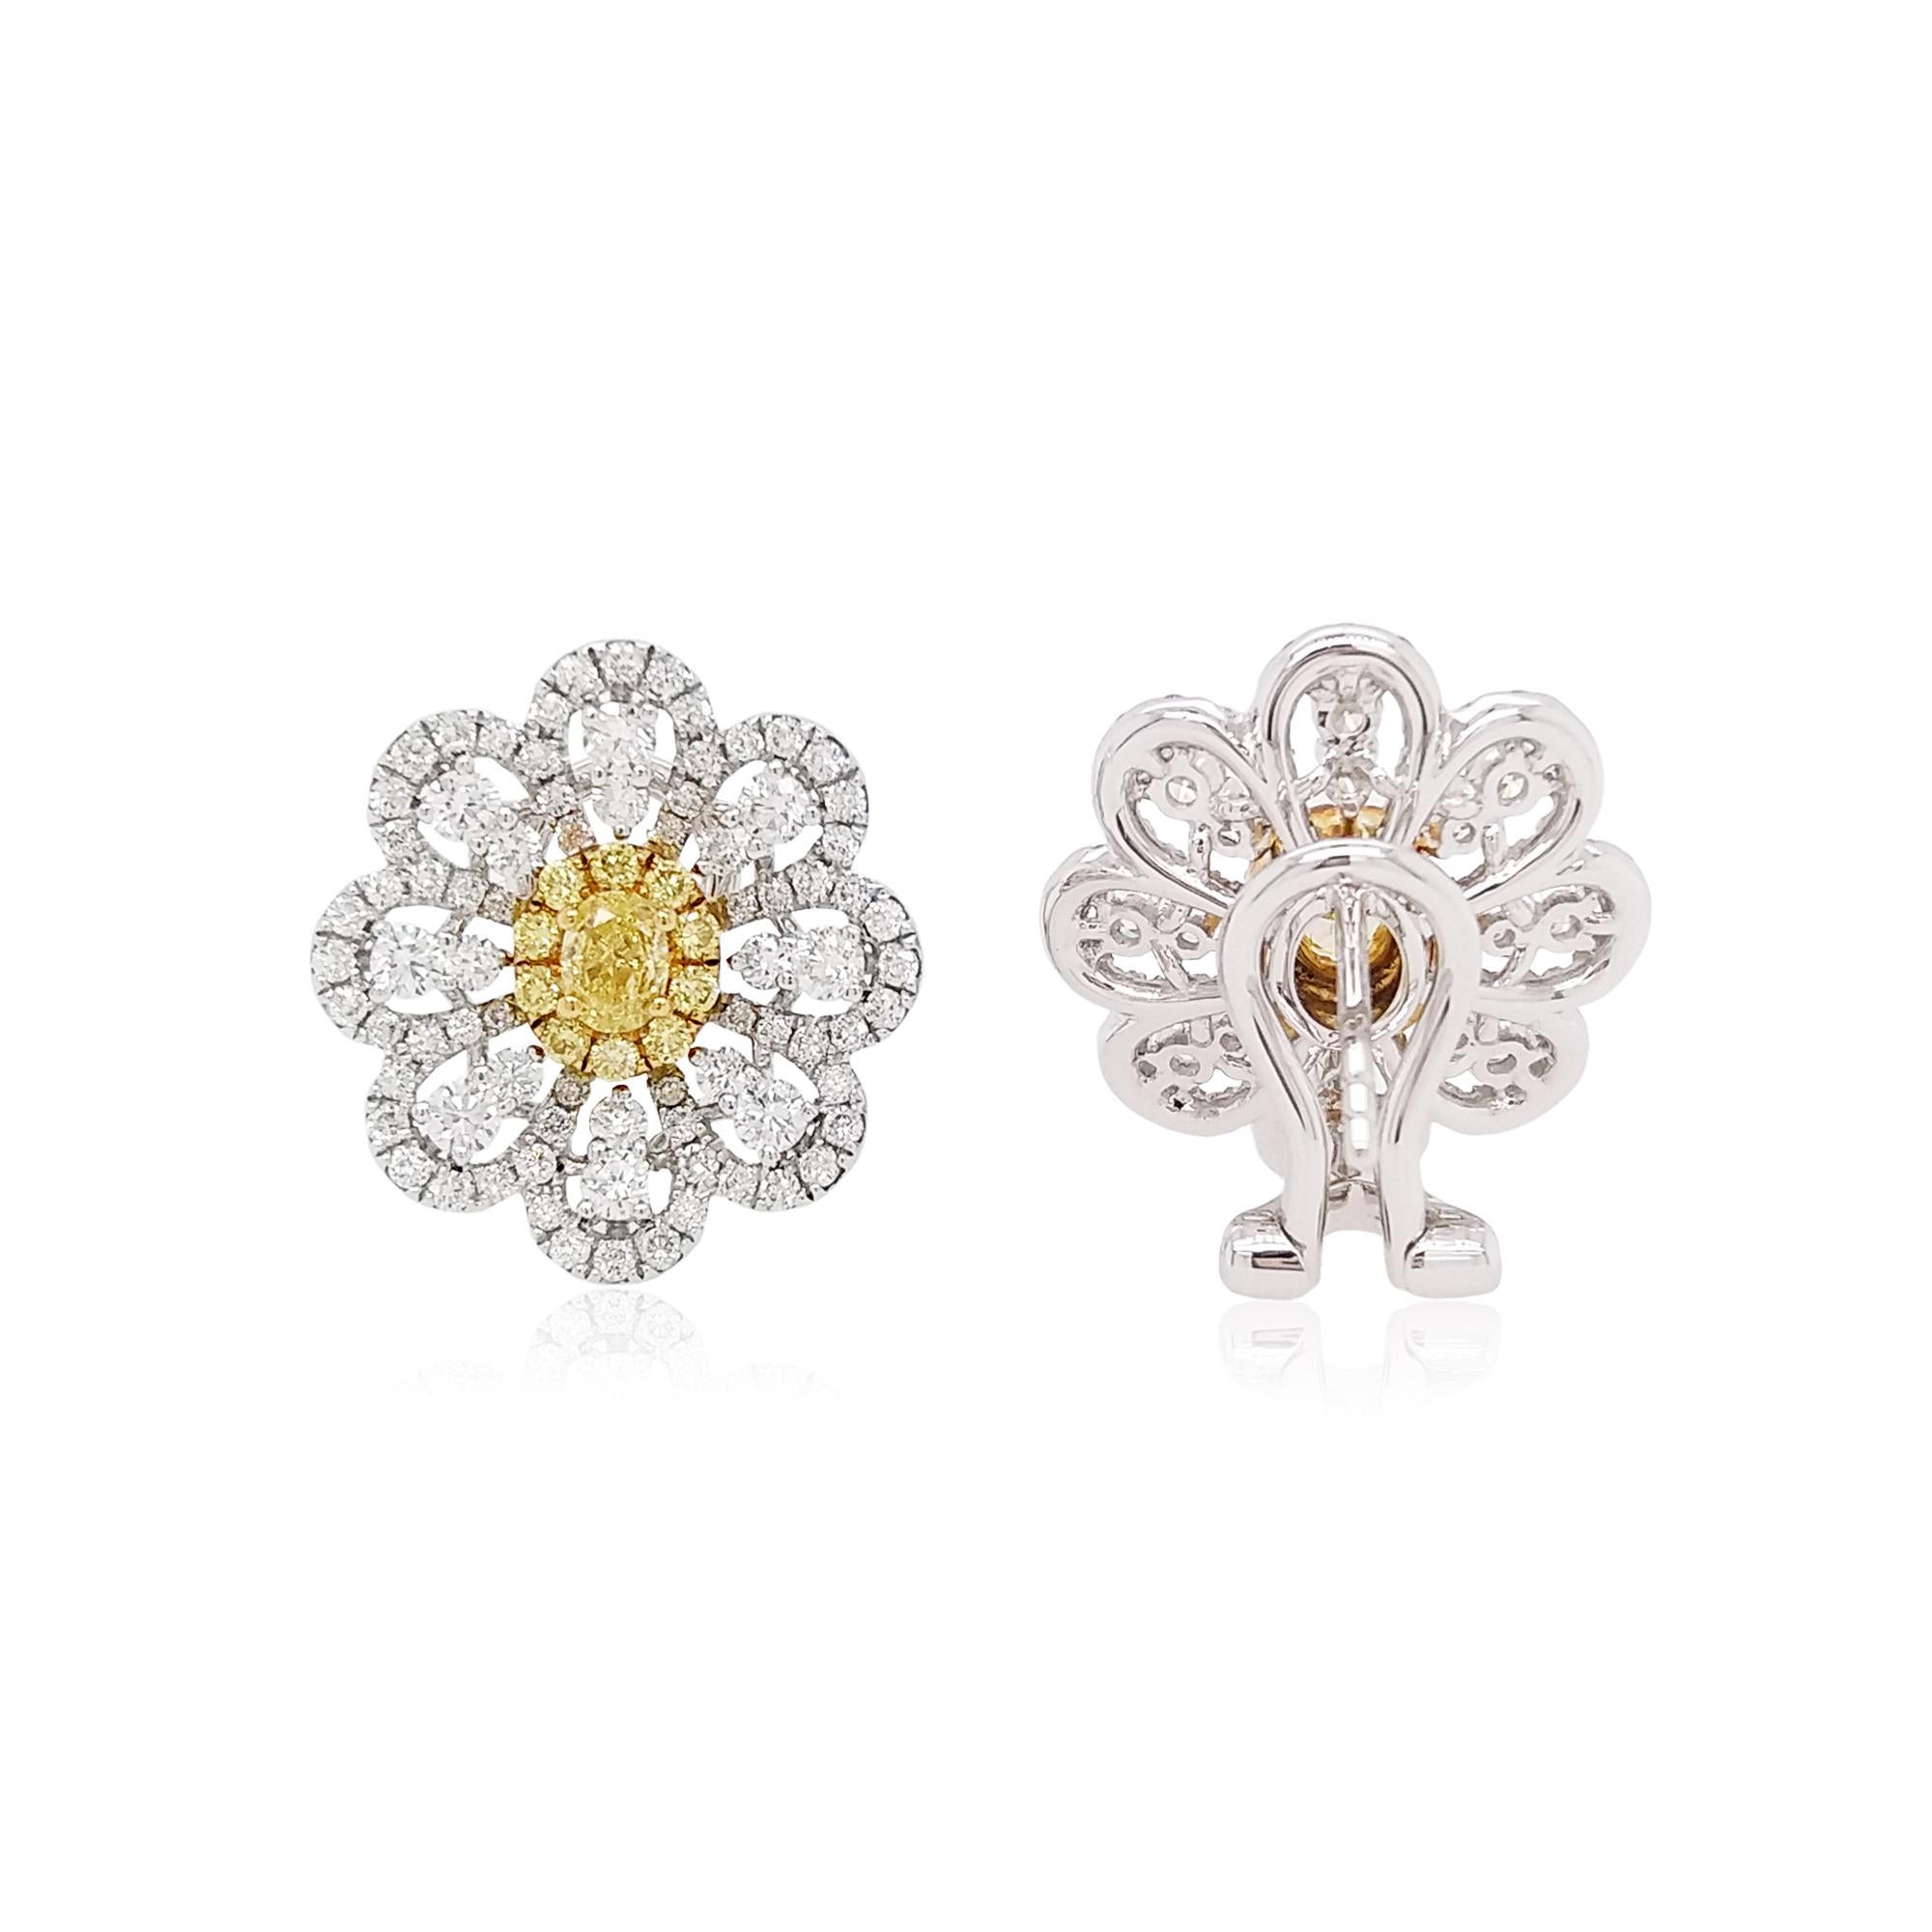 Contemporary Certified Yellow Diamond and White Diamond in 18K Gold Clip Earrings